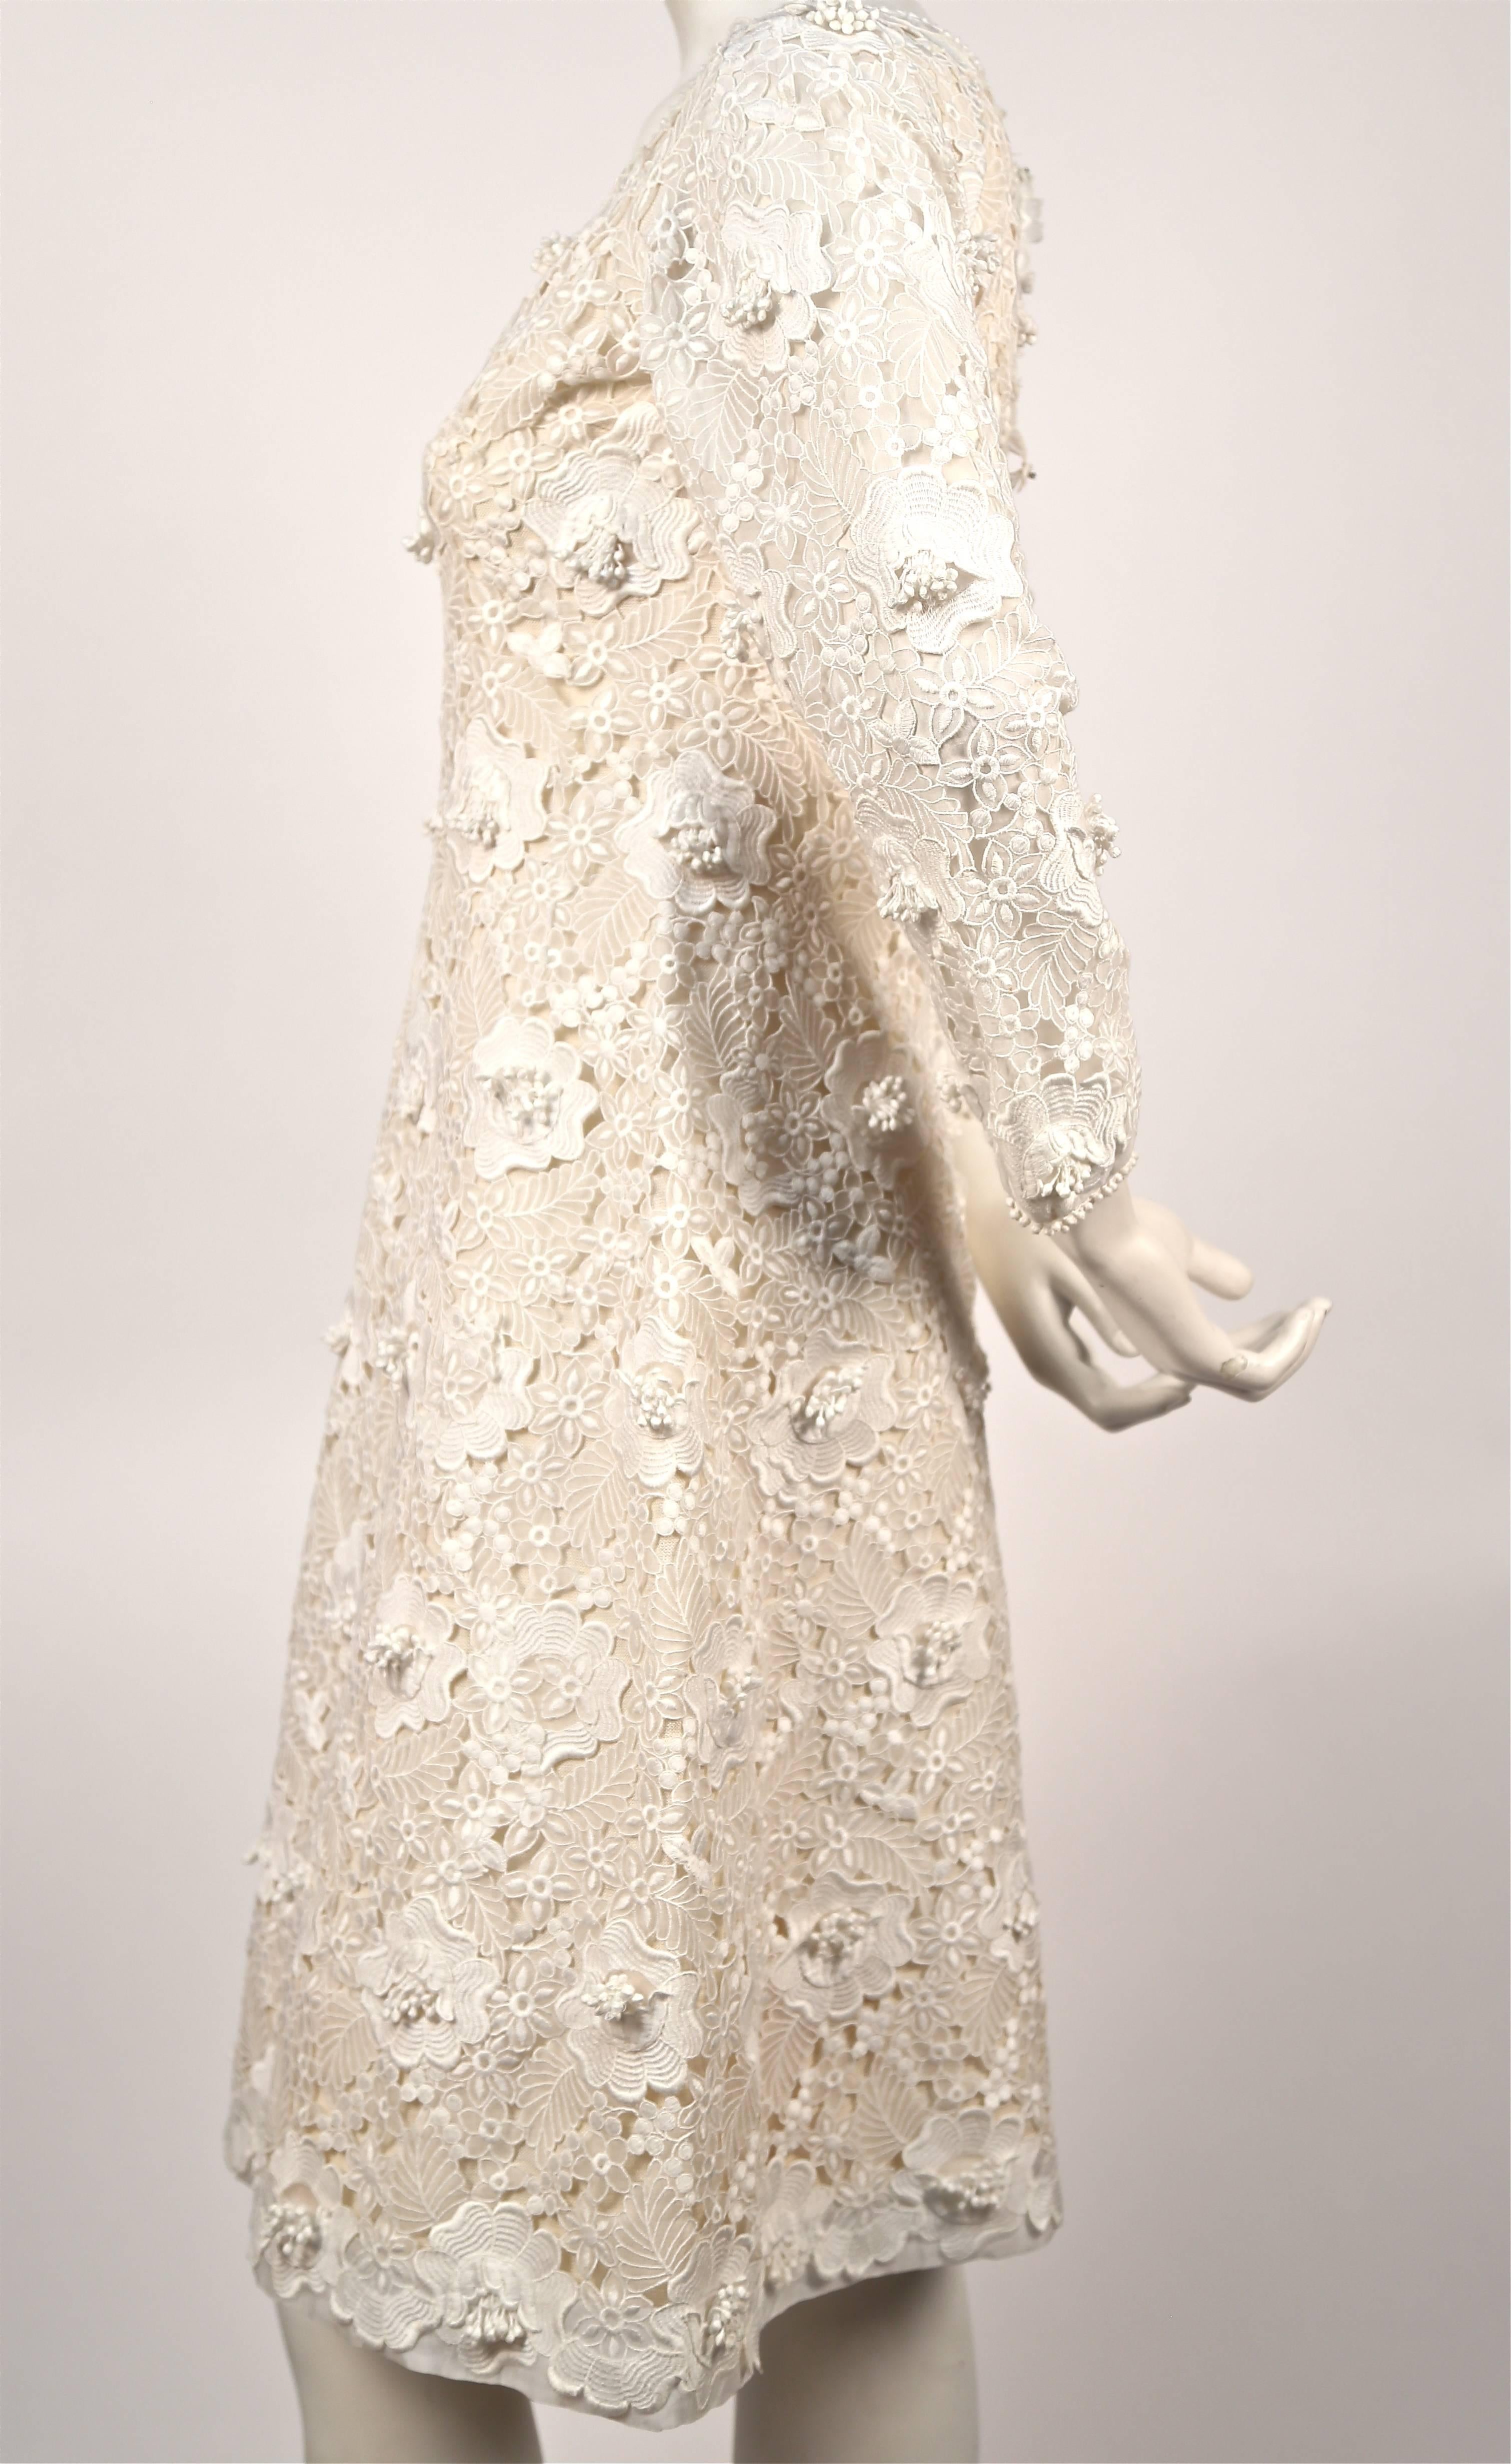 Stunning off white Venice lace dress from Yves Saint Laurent dating to 1964. All the details and hand finishing you would find in a haute couture garment. Great as a wedding dress for a modern bride. Dress is very small and would not zip up fully on